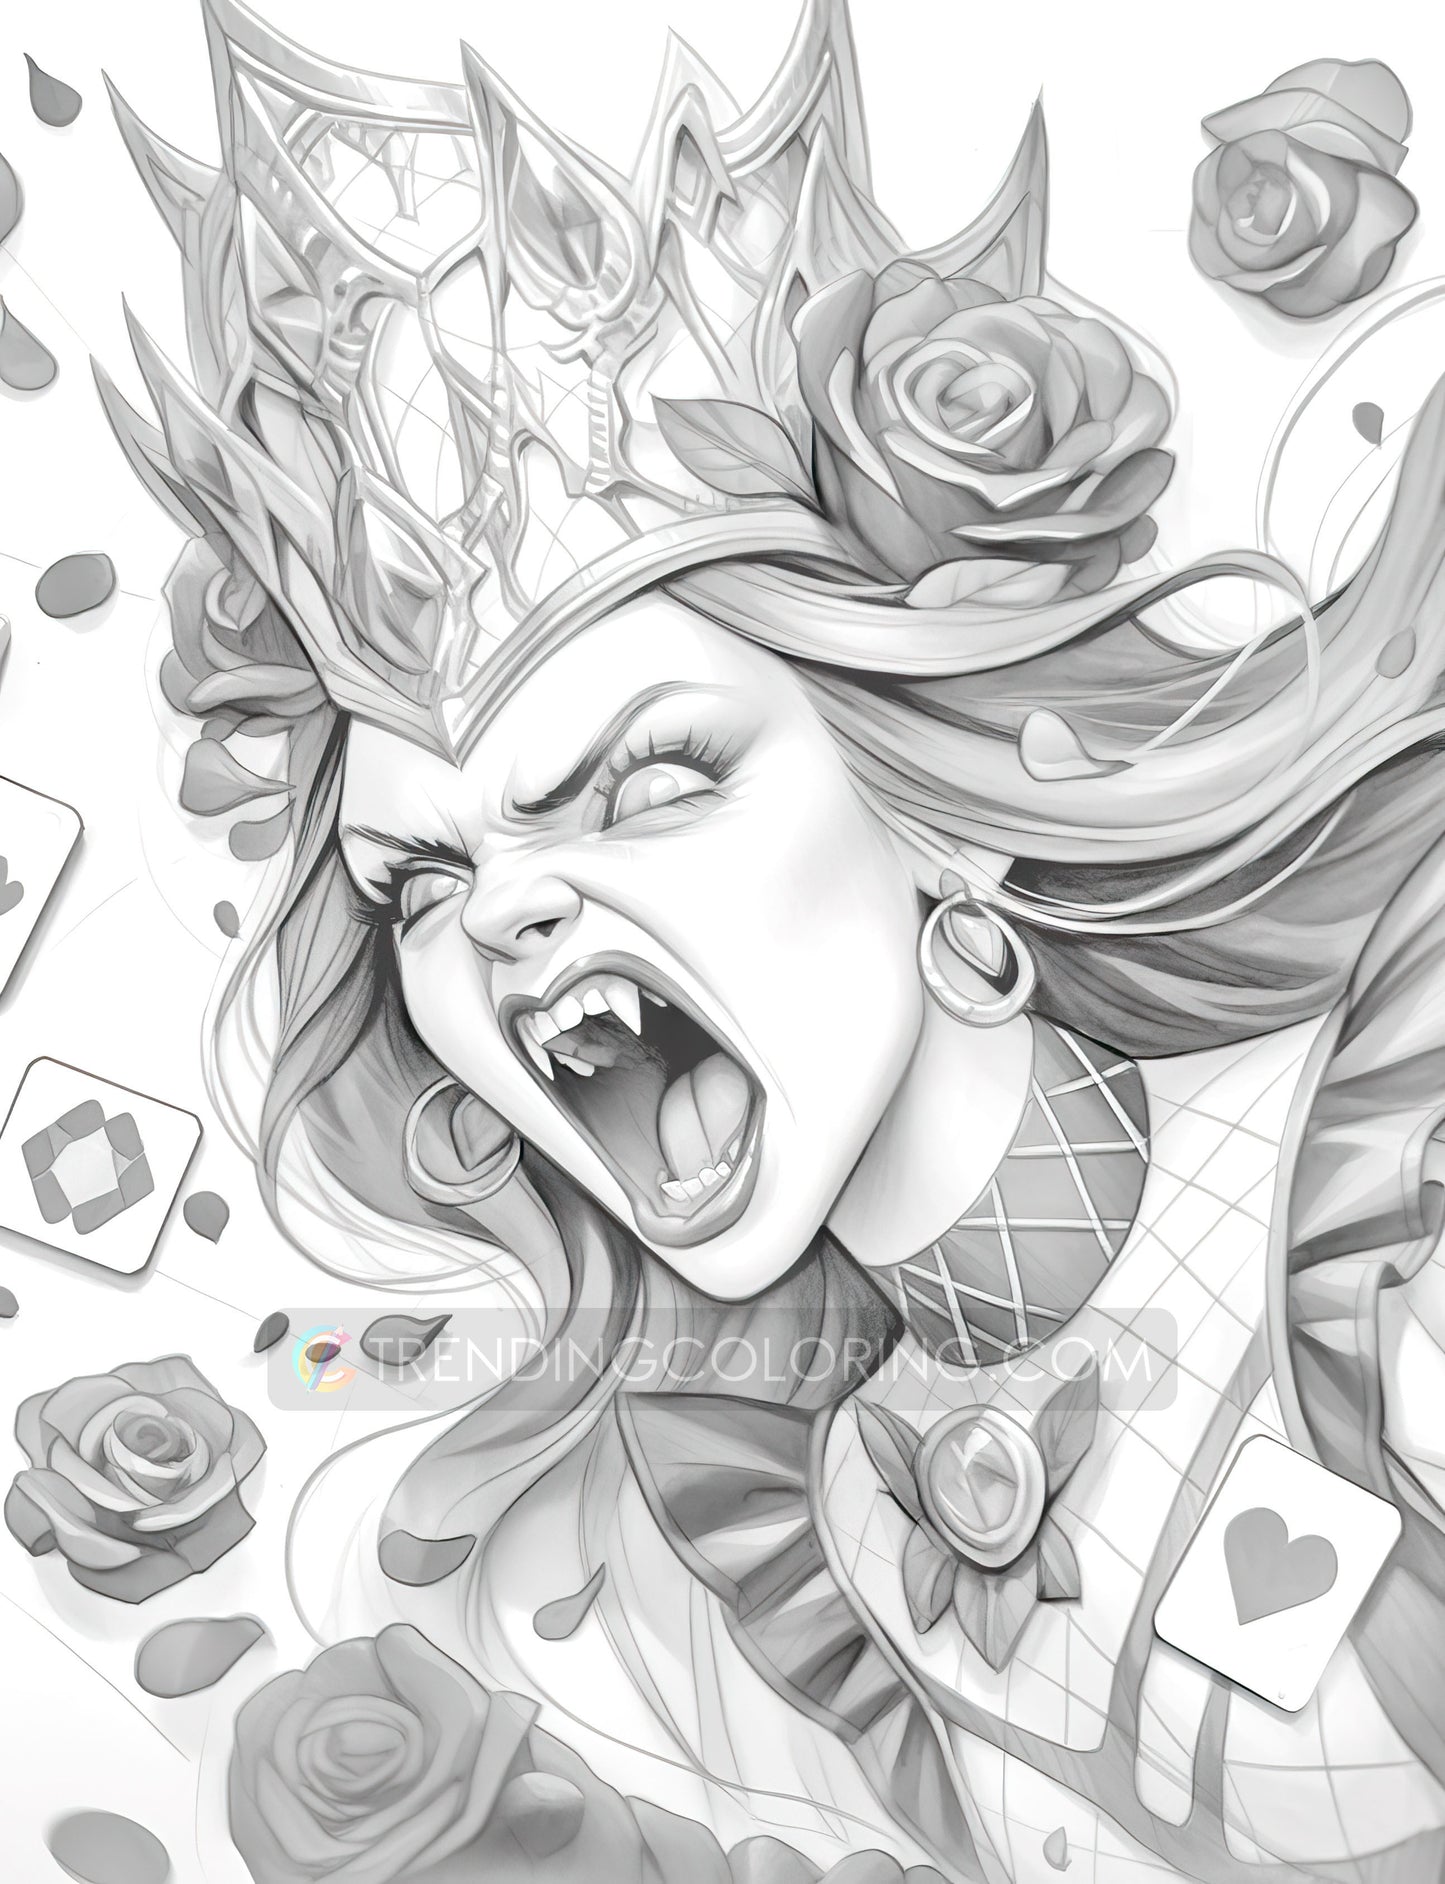 50 The Queen of Heart Grayscale Coloring Pages - Instant Download - Printable PDF Dark/Light